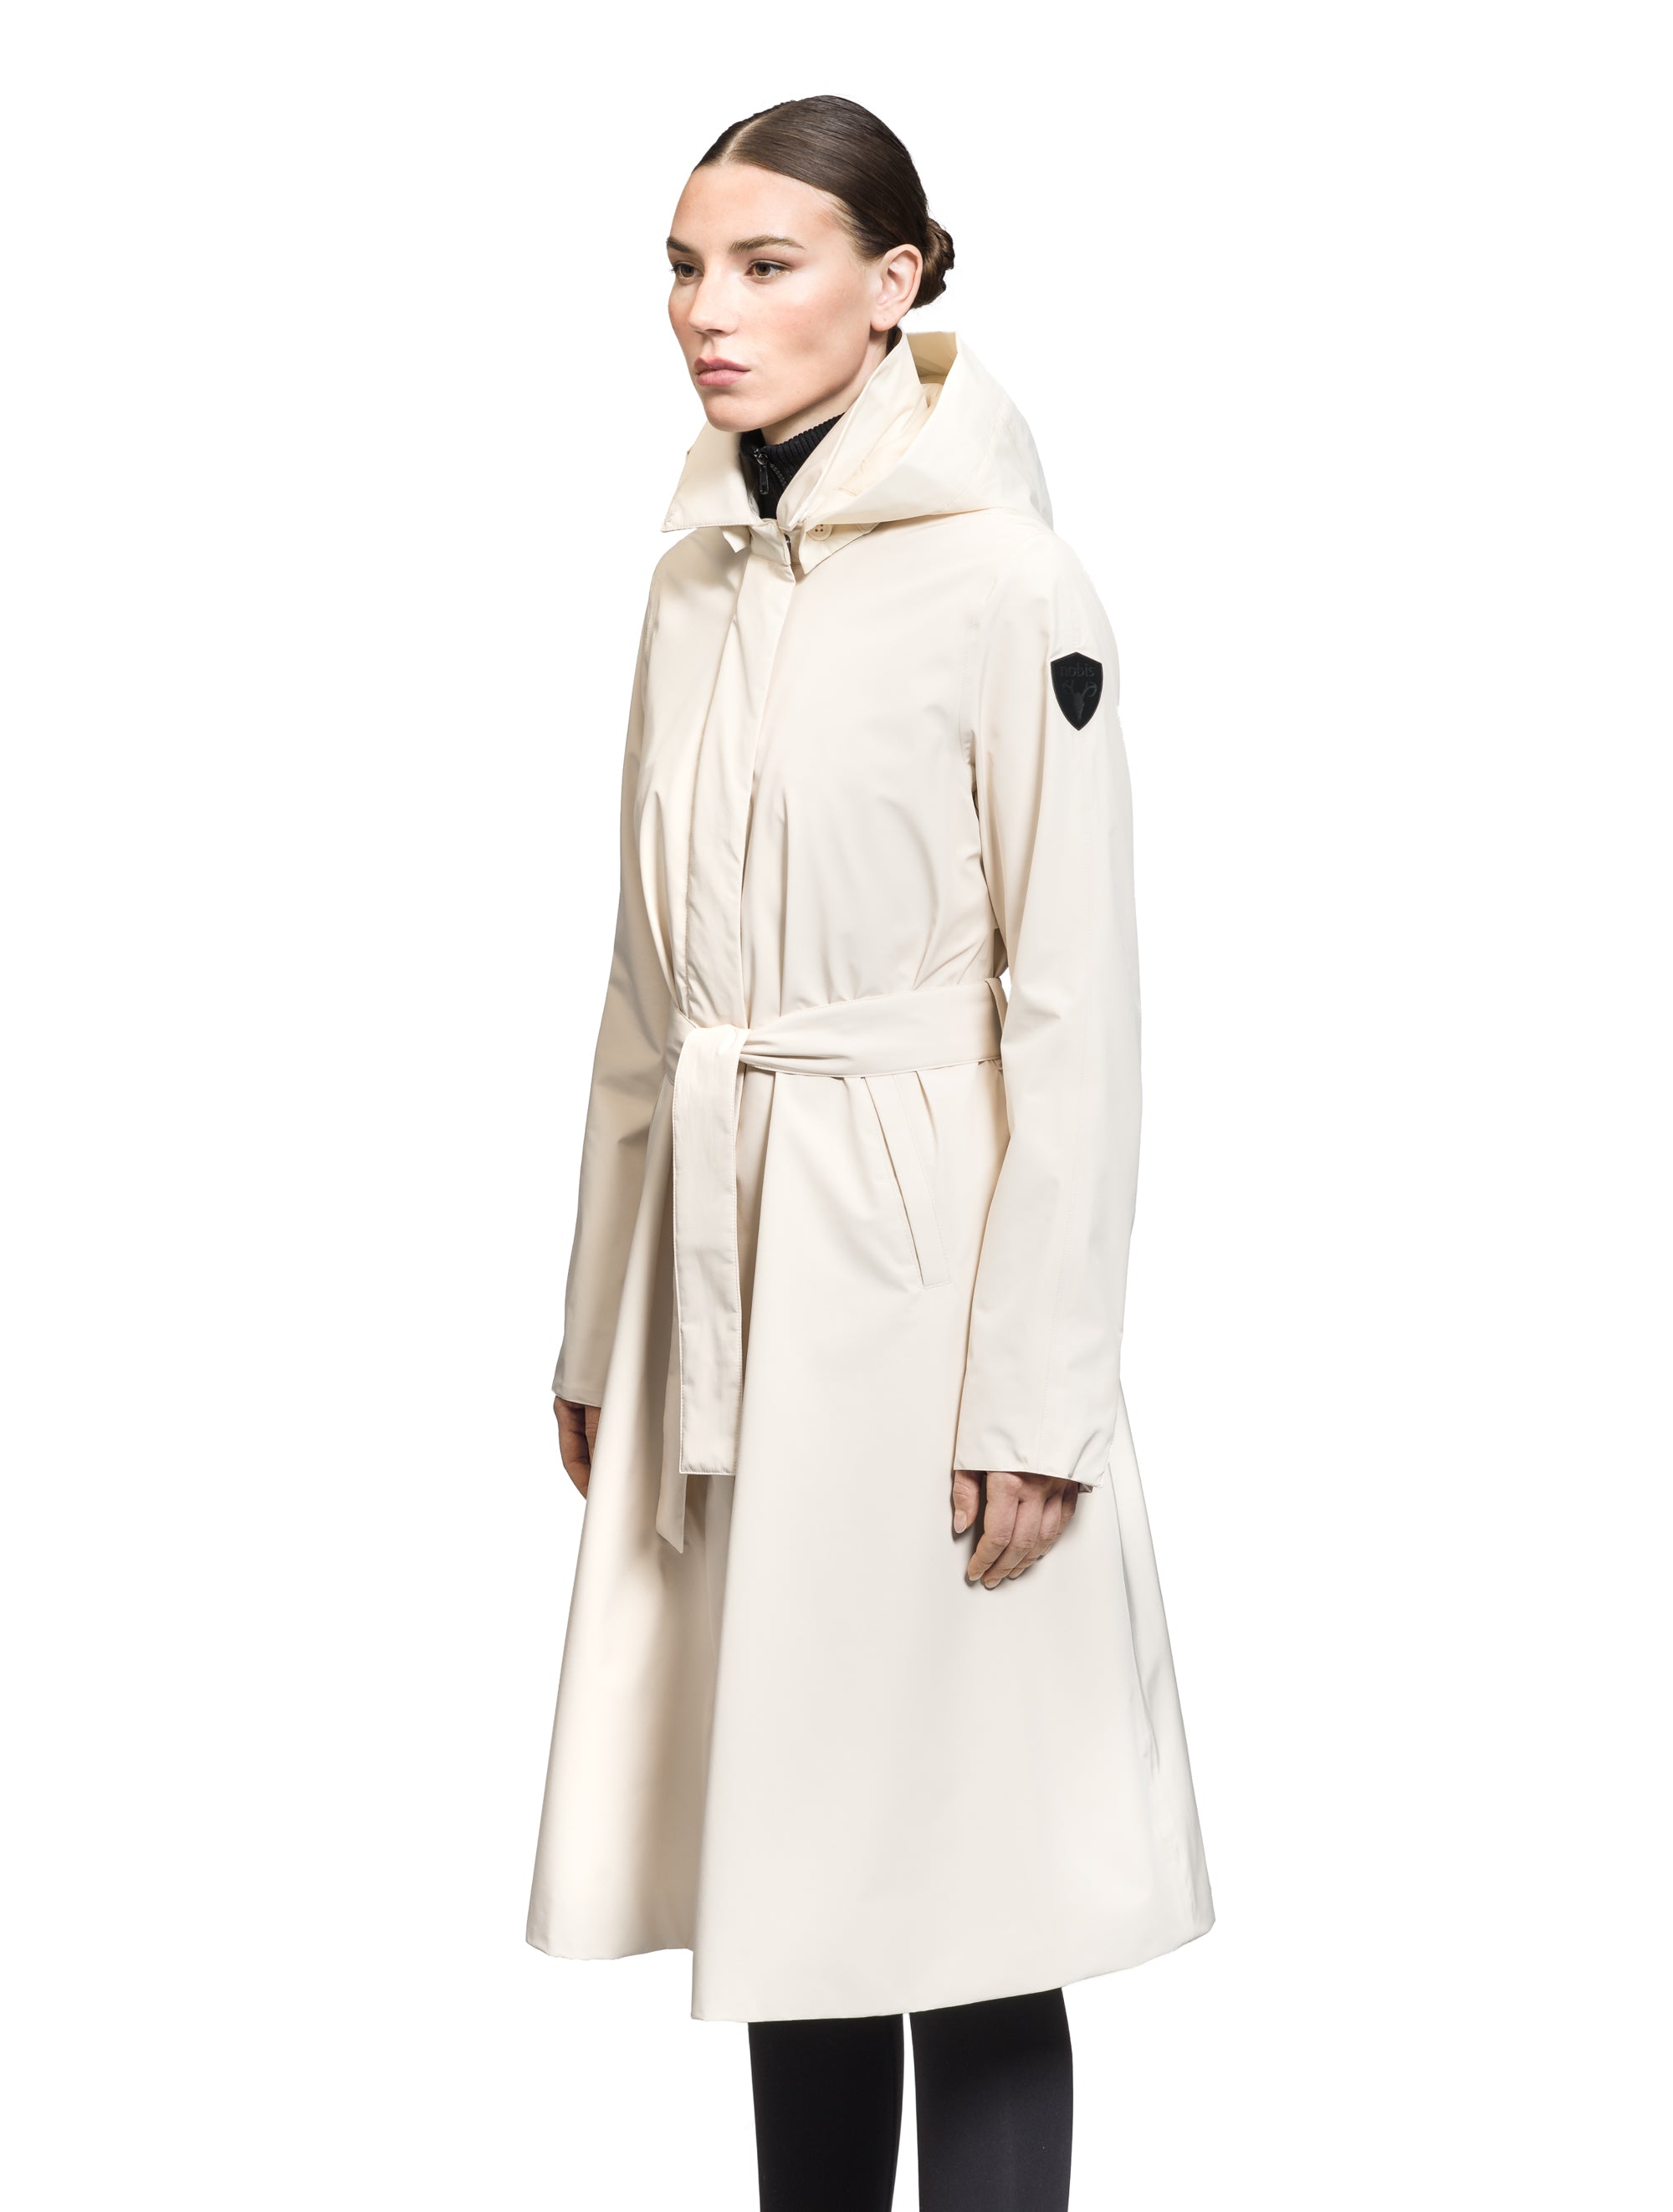 Ivy Women's Tailored Trench Coat